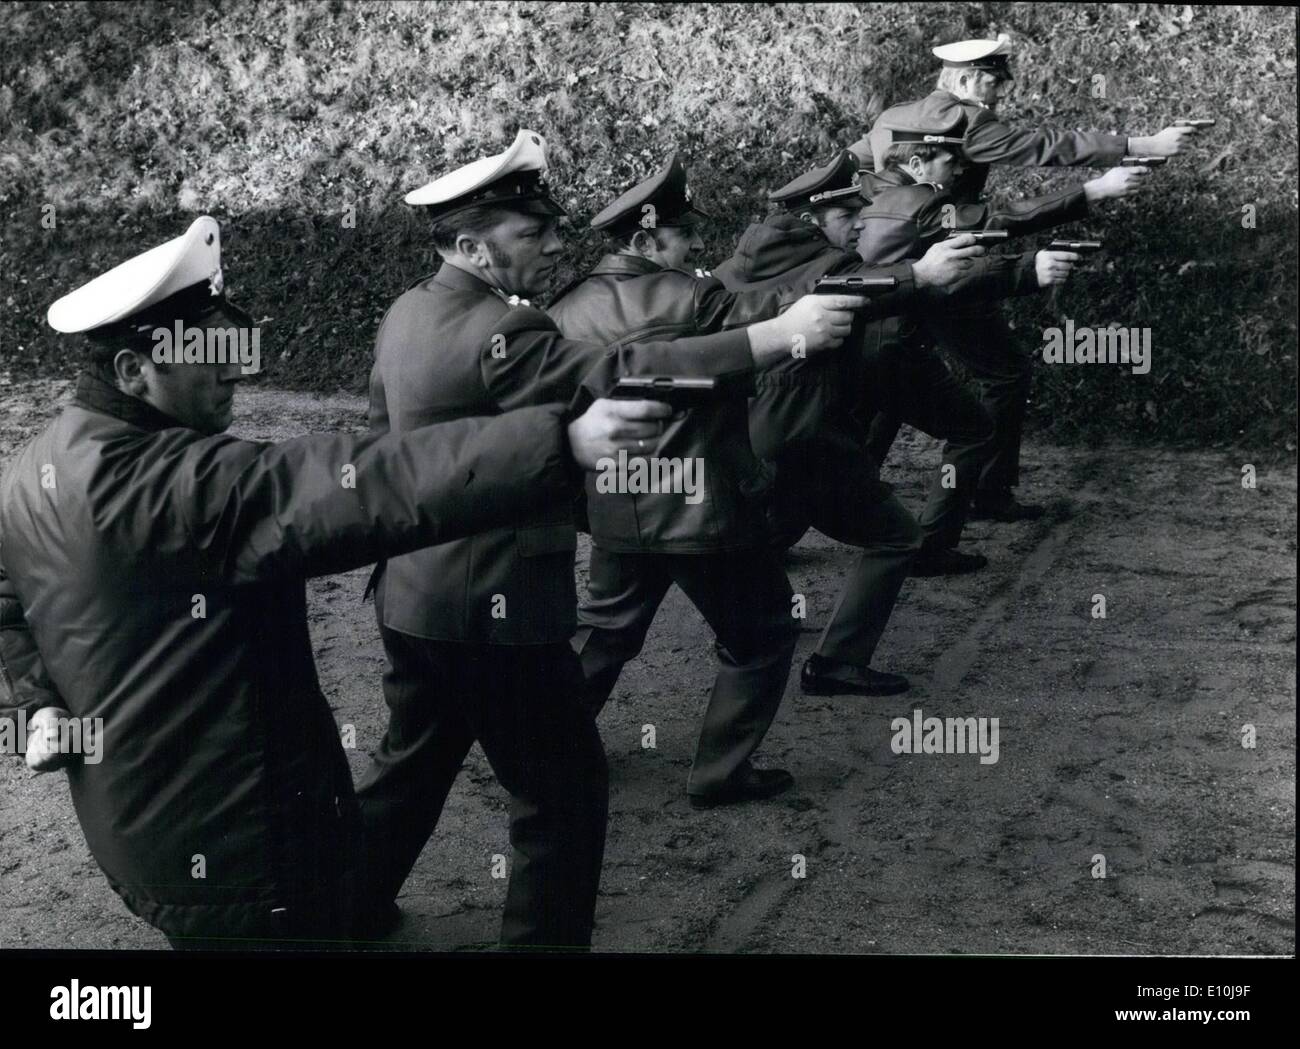 Dec. 12, 1972 - Sharpshooter-Training To Counter Terrorism And Force: The Munich bloodbath during the Olympic Games 1972 caused Stock Photo